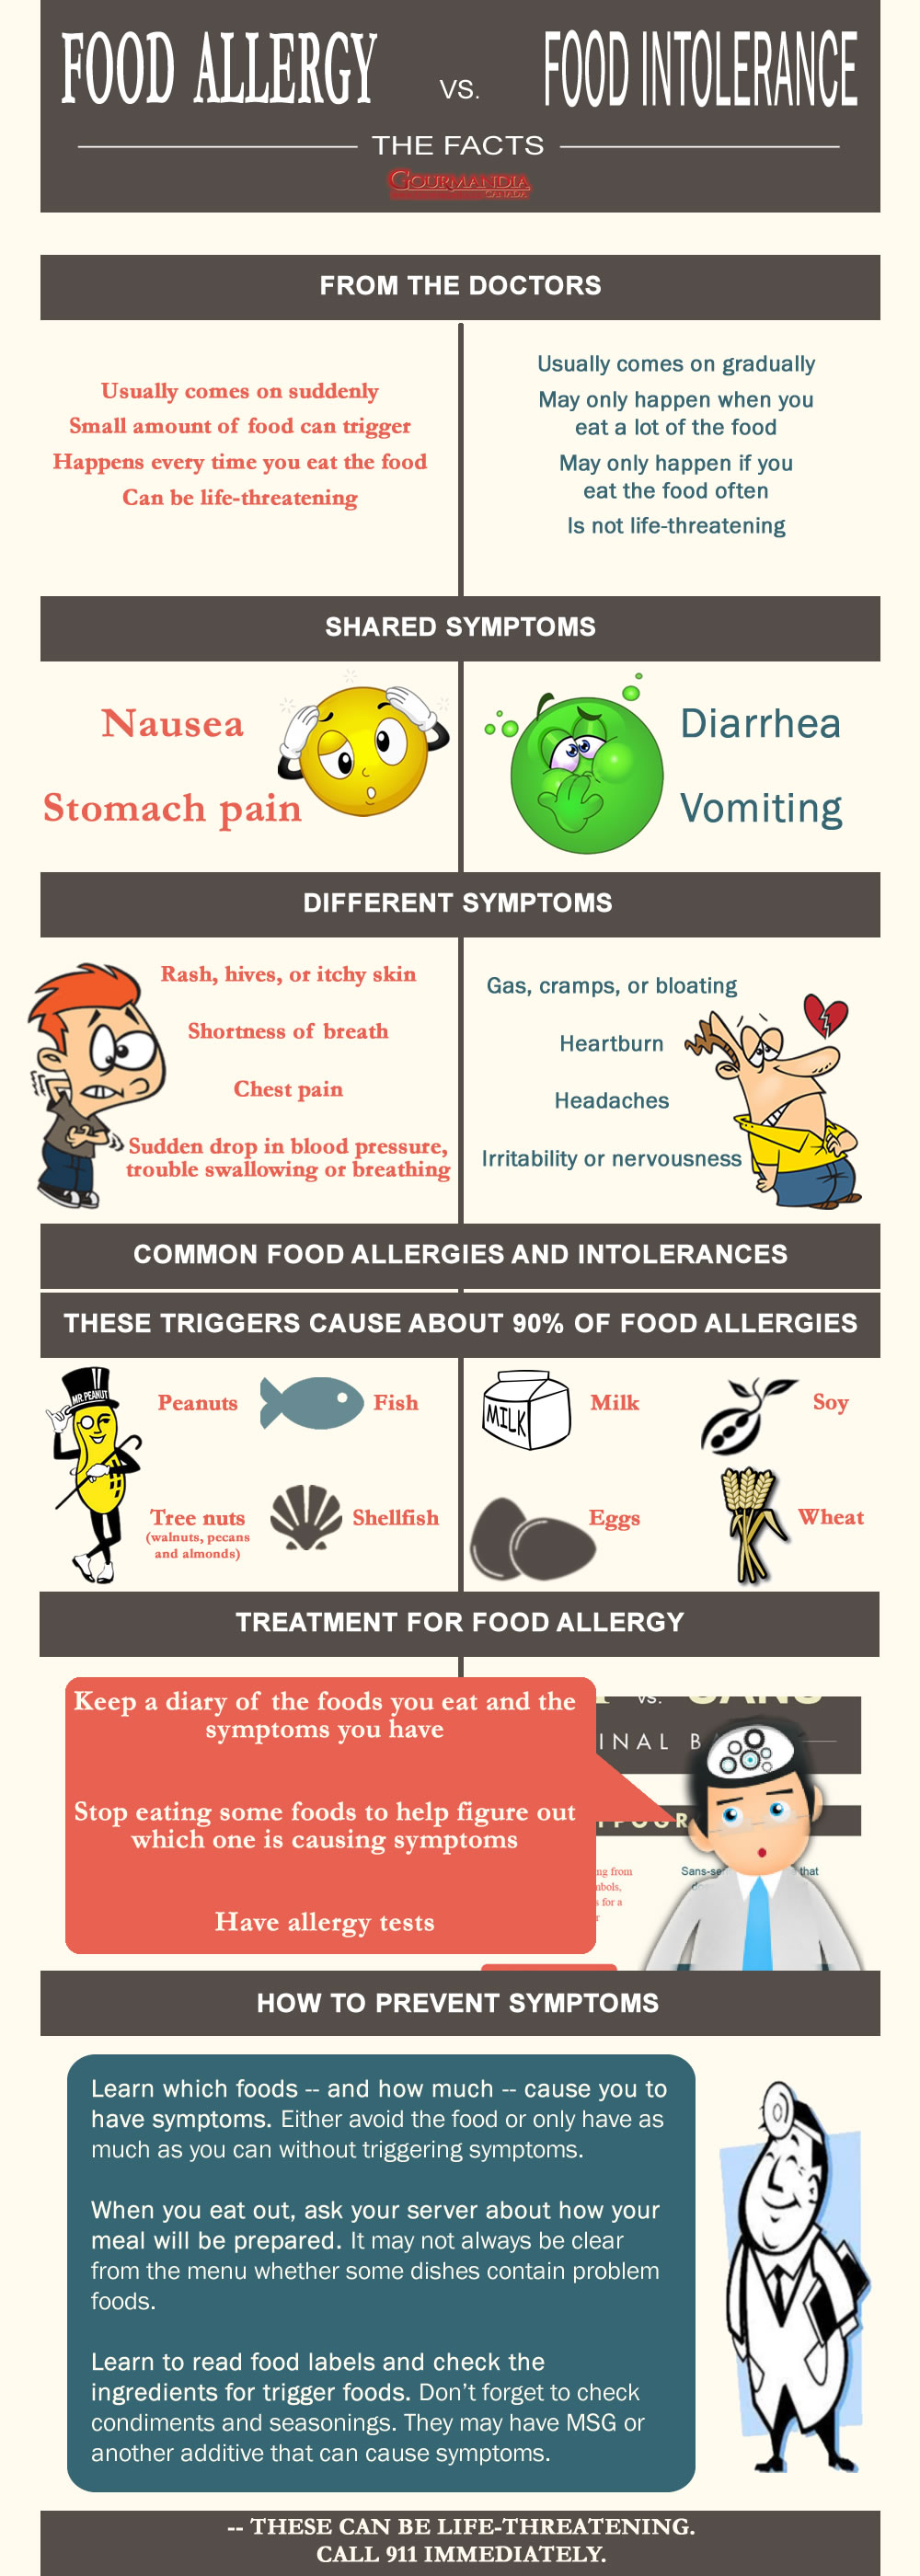 Comparison-of-Food-Allergy-and-Food-Intolerance